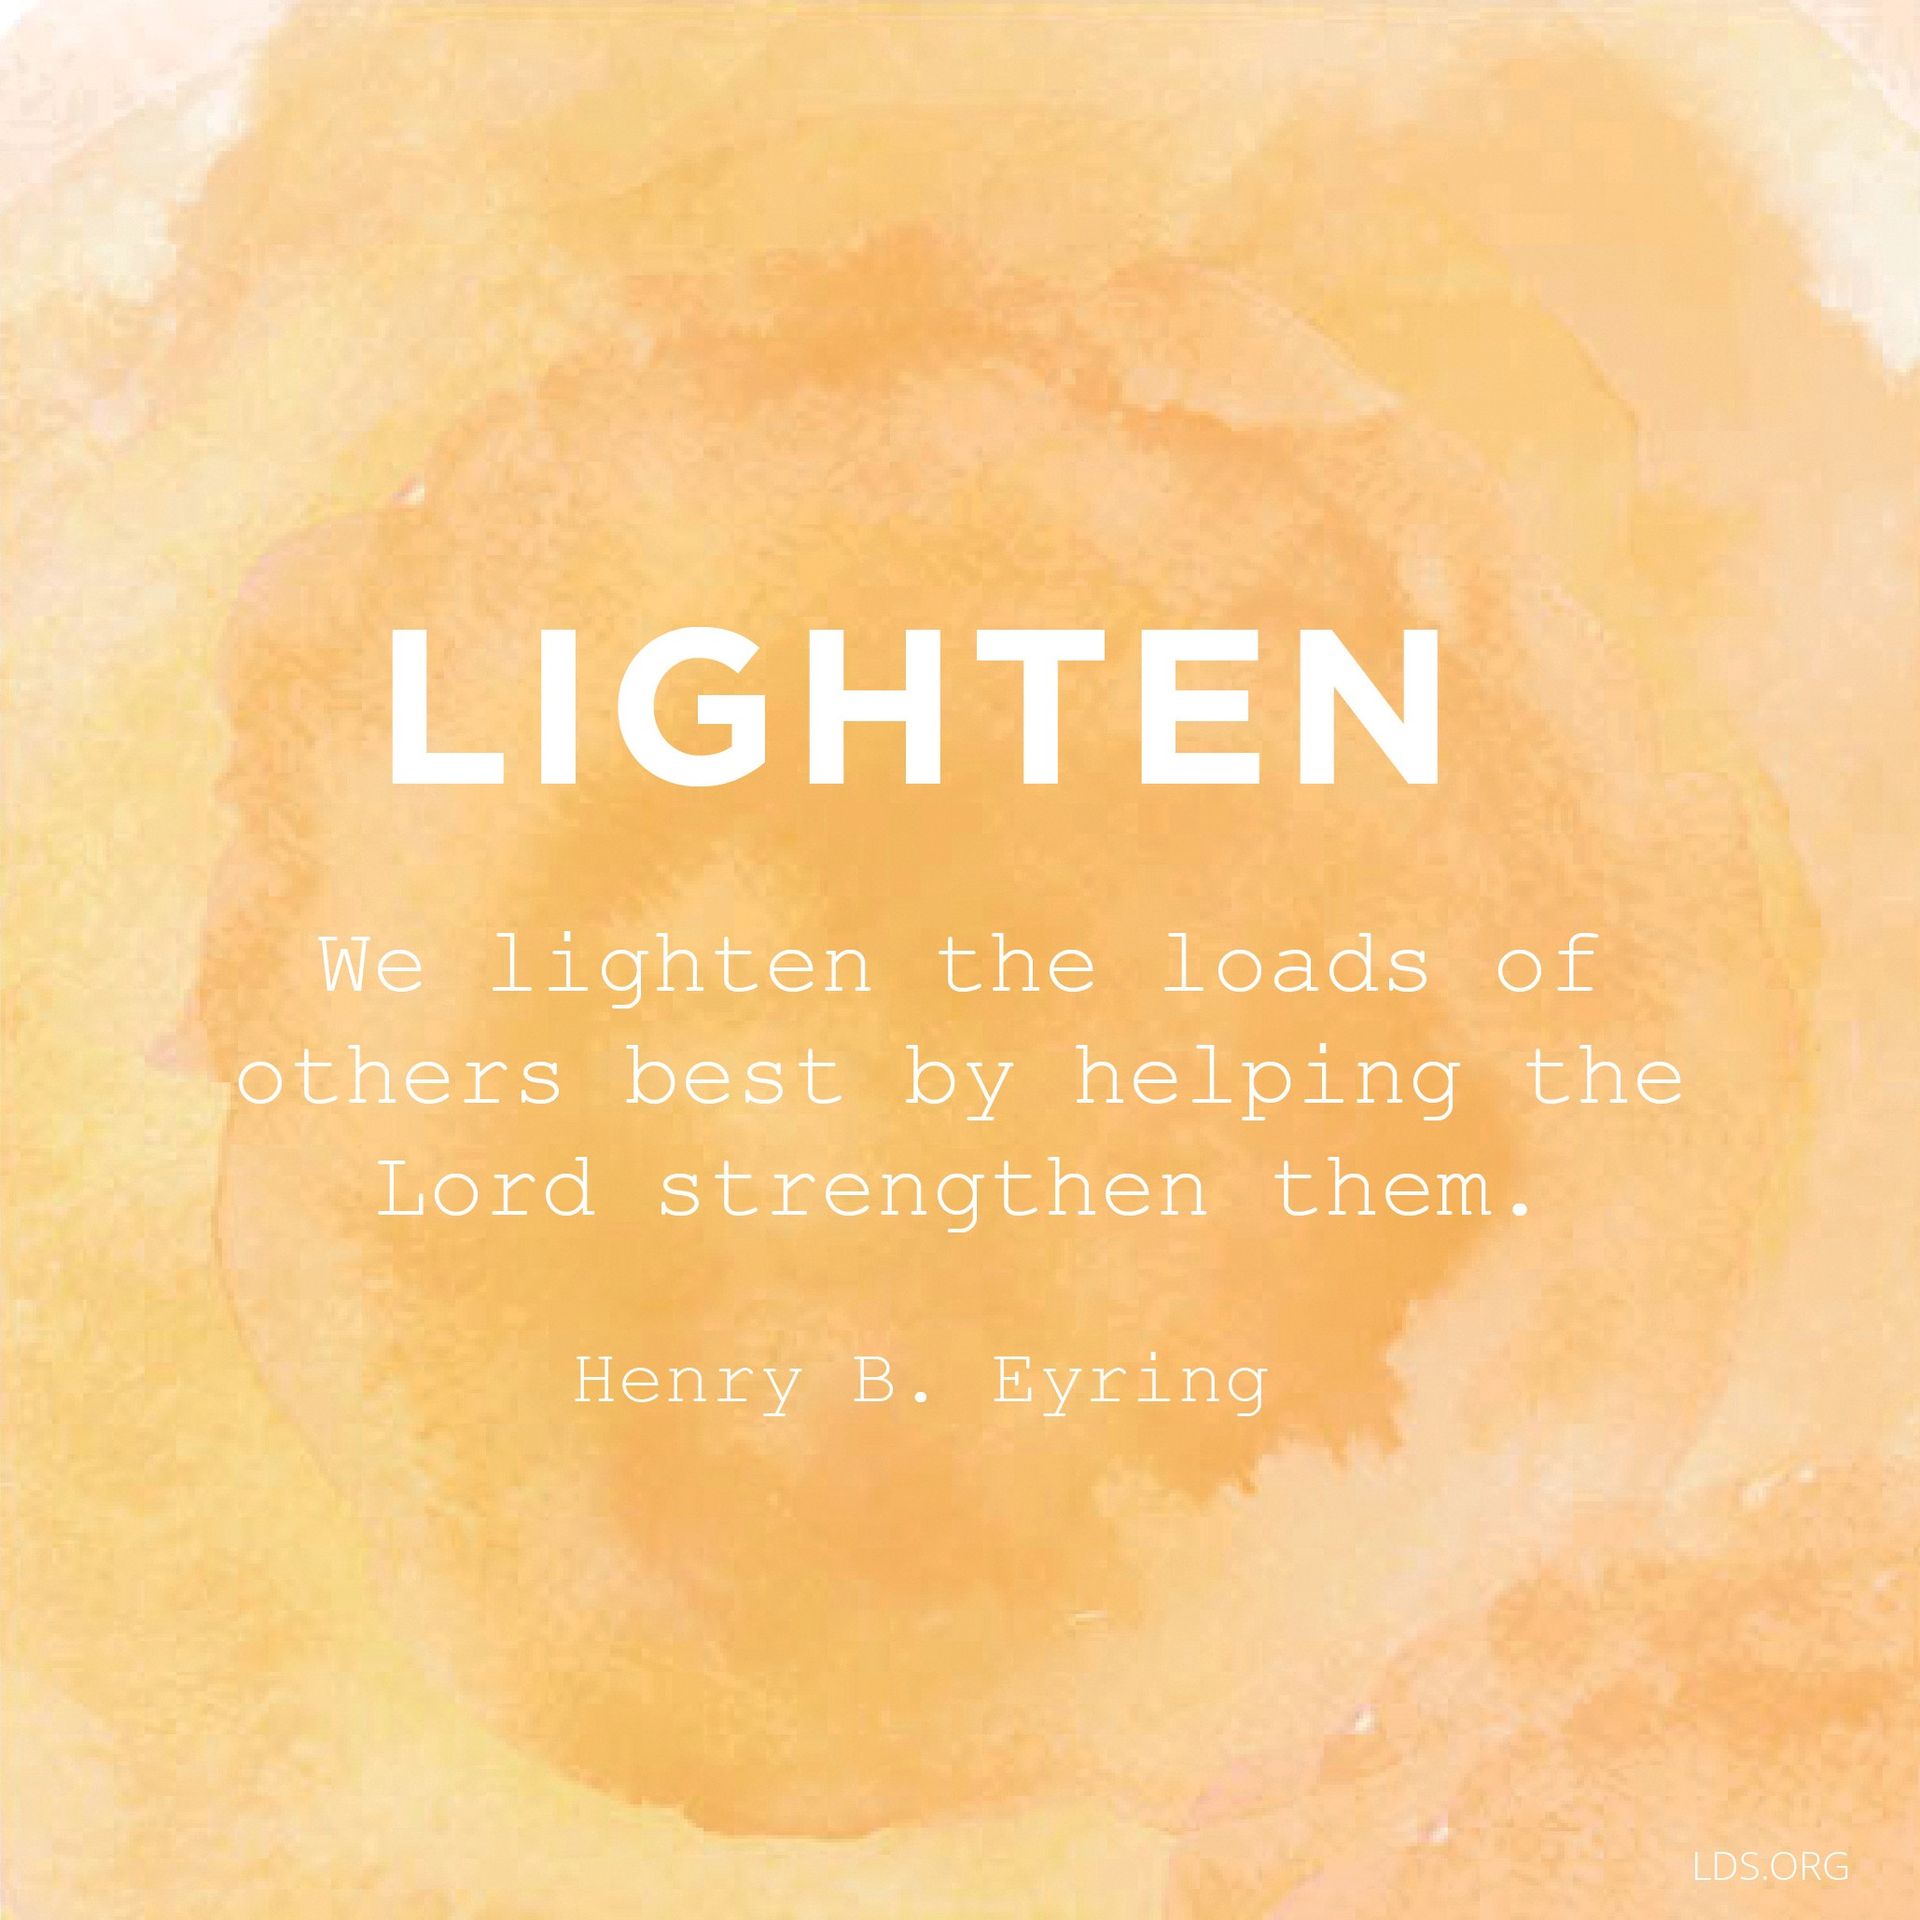 “We lighten the loads of others best by helping the Lord strengthen them.”—President Henry B. Eyring, “The Comforter”